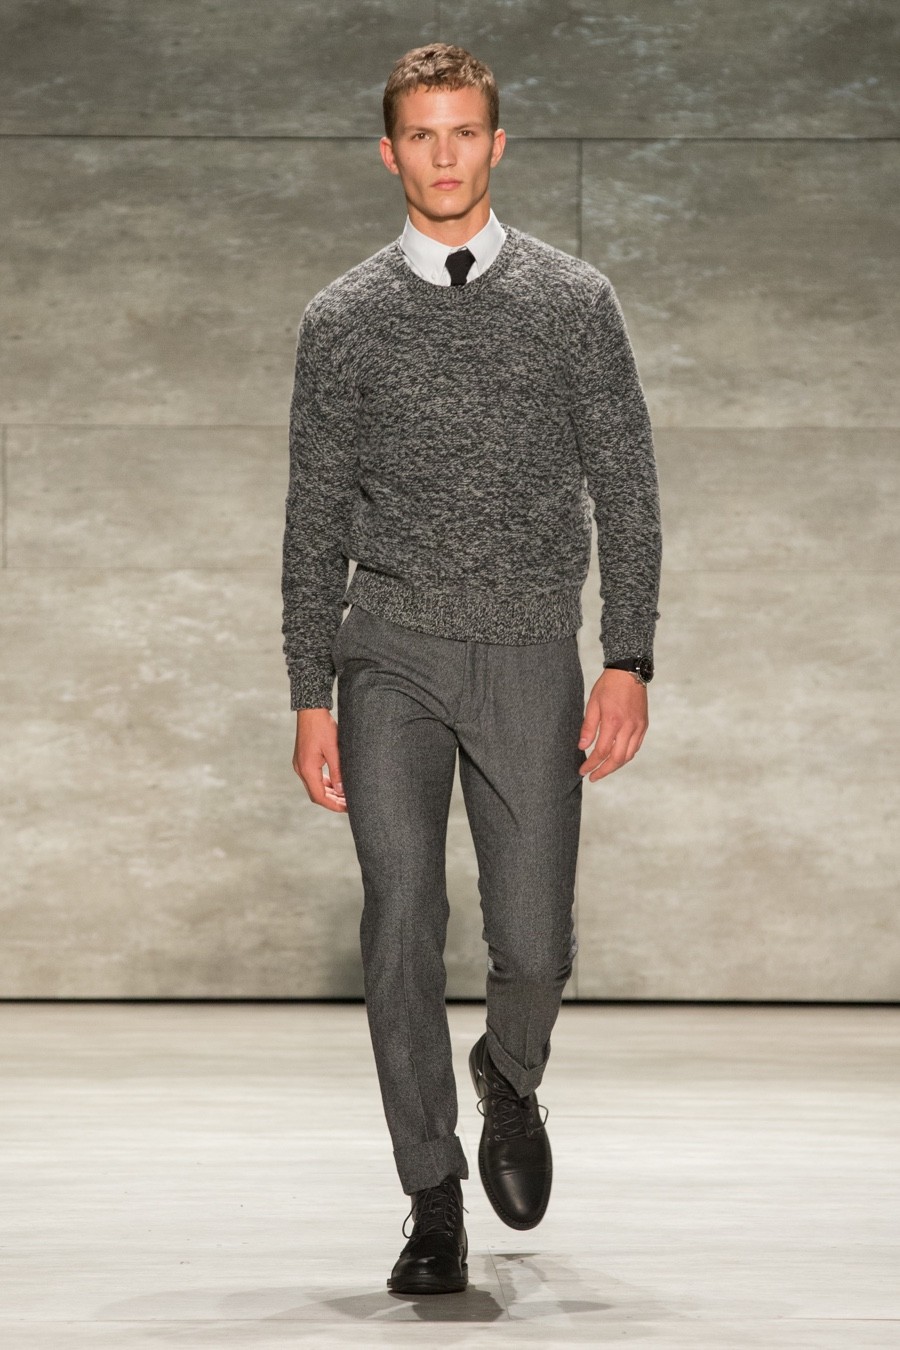 Todd Snyder Fall Winter 2015 Menswear Collection 032